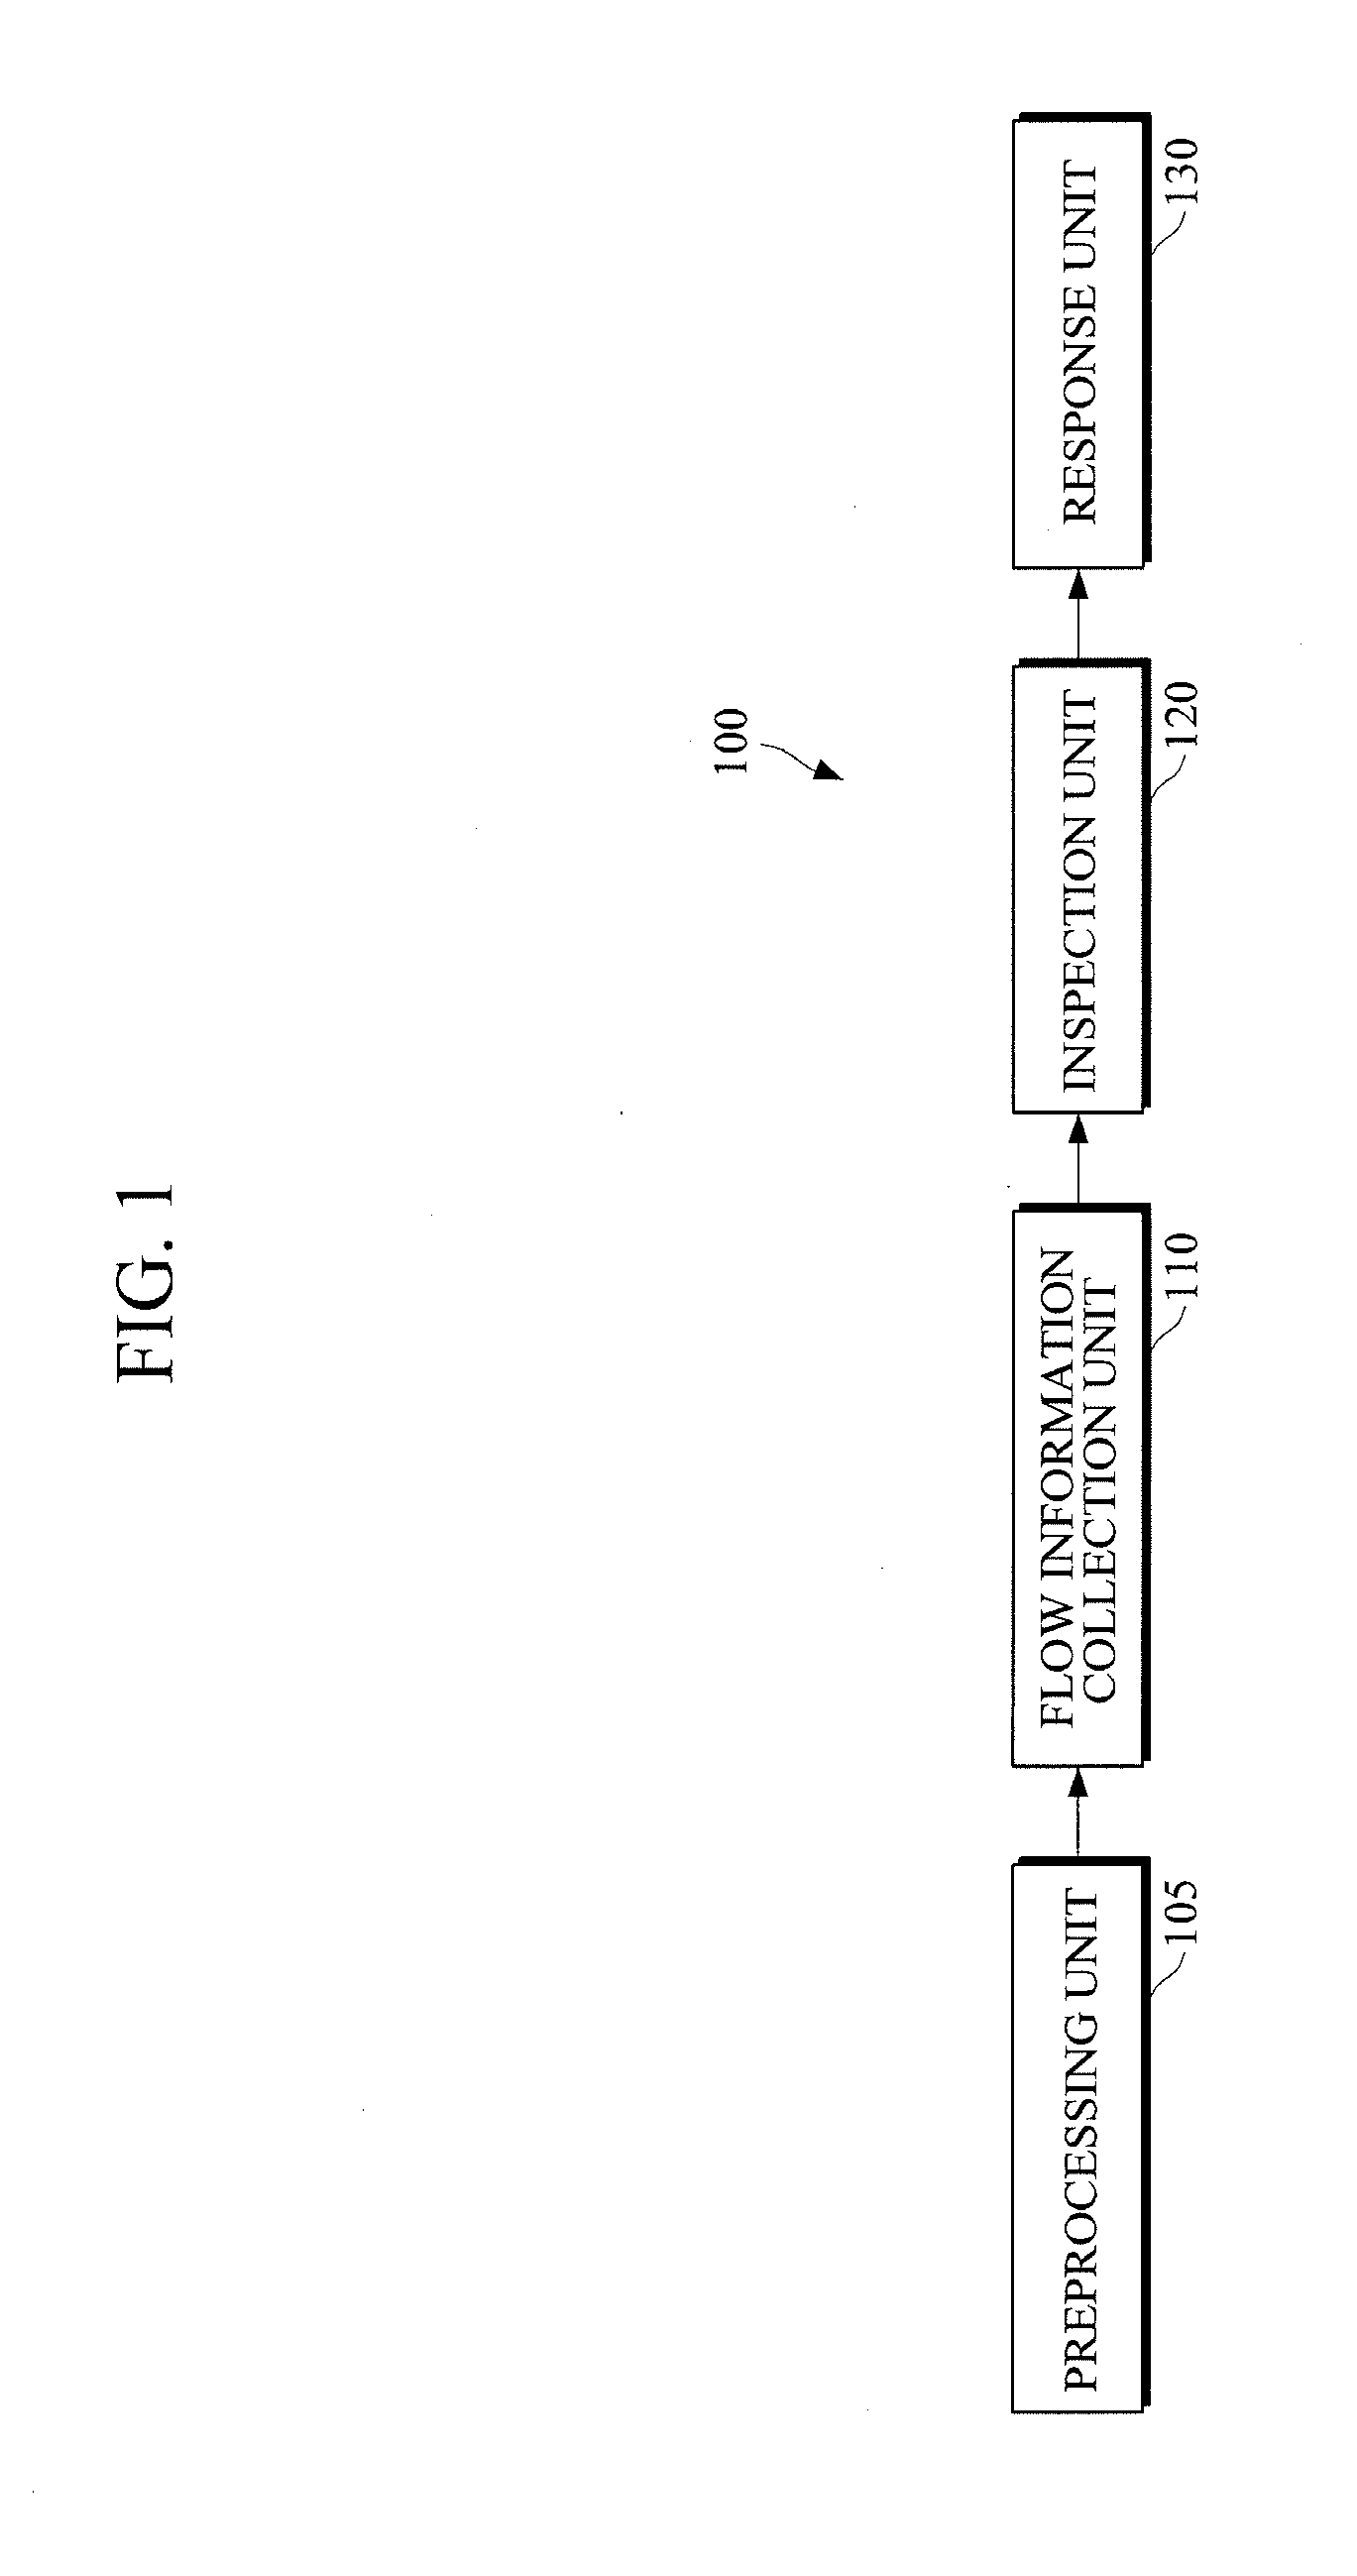 Ddos attack detection and defense apparatus and method